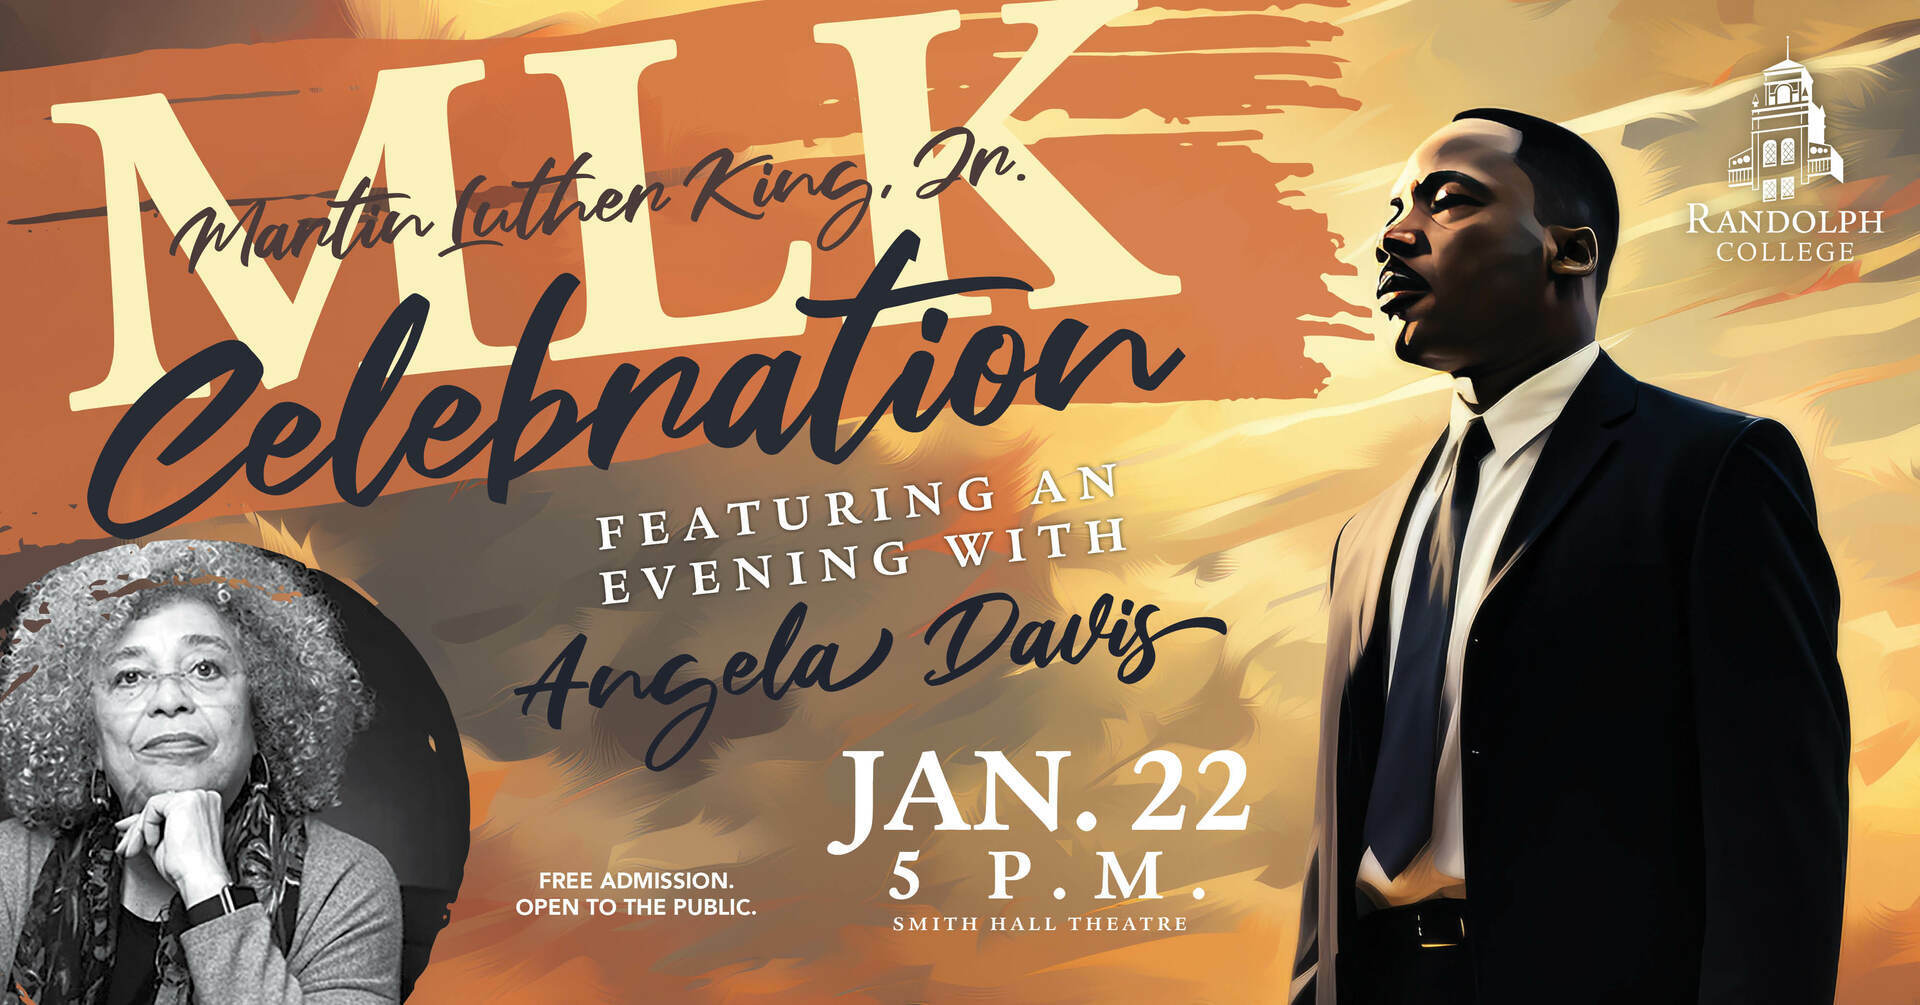 Randolph College's Martin Luther King, Jr. Celebration, featuring An Evening with Angela Davis, Lynchburg City, Virginia, United States